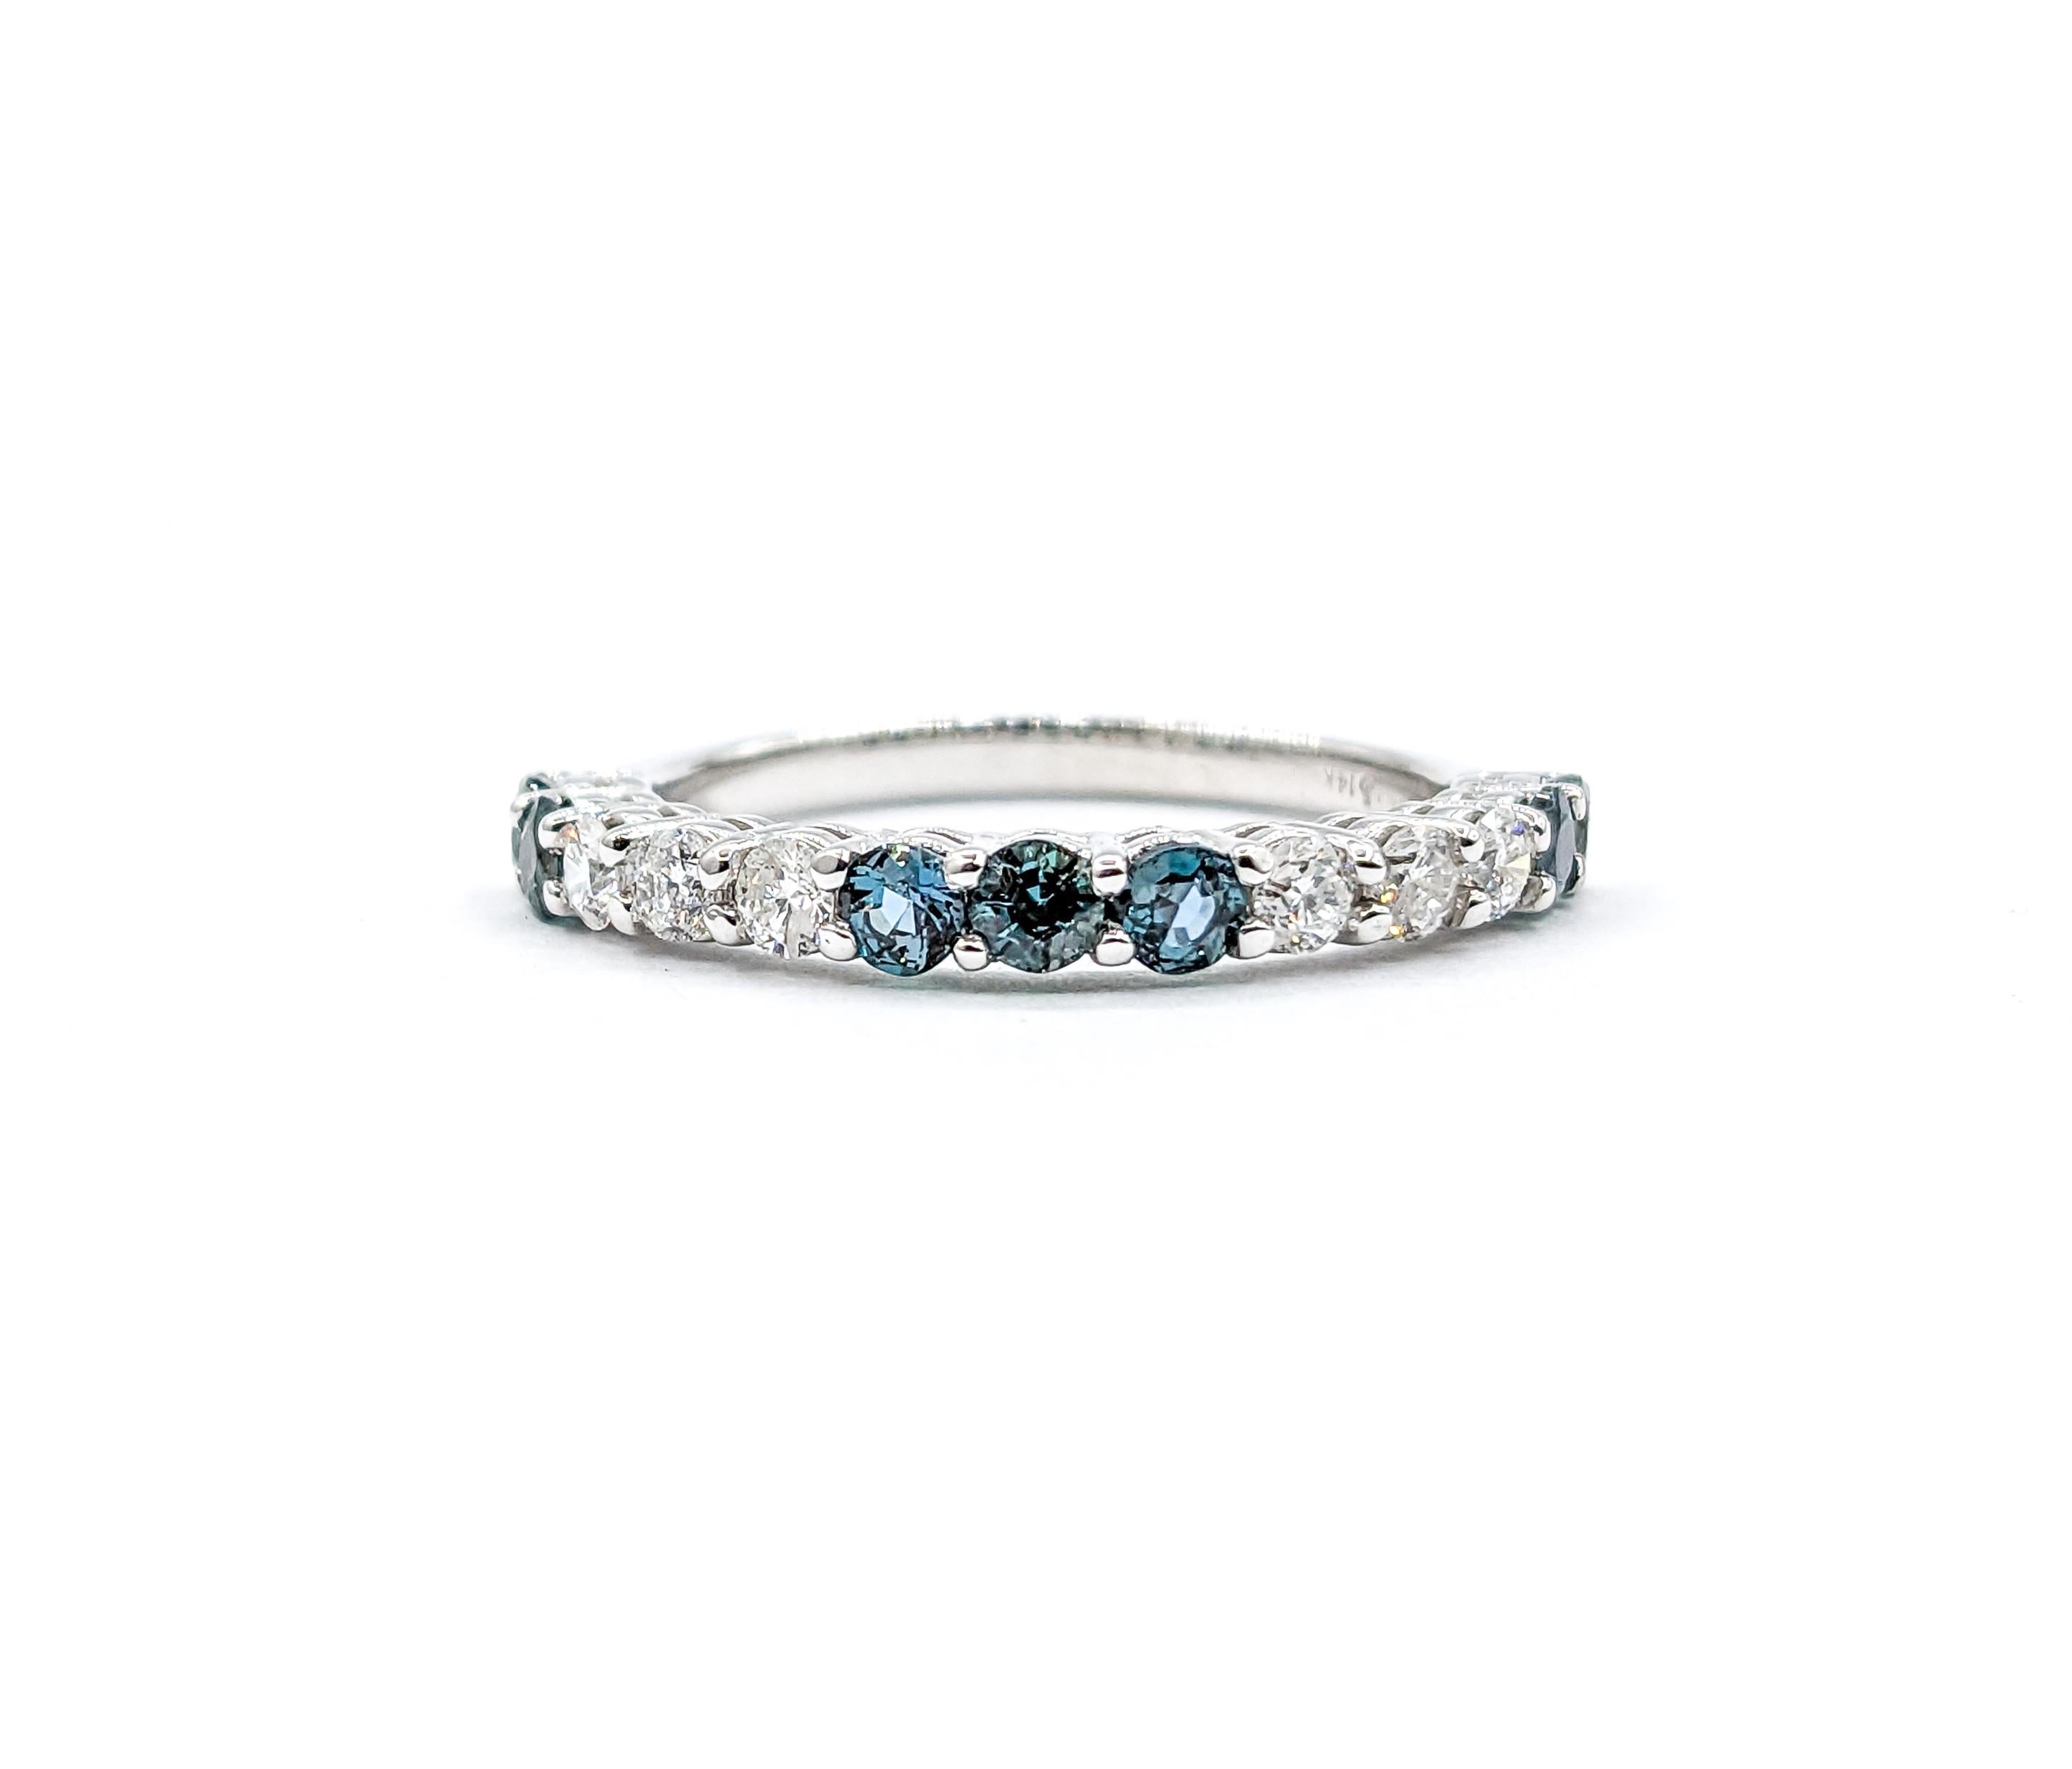 Brazilian Natural Alexandrite & Diamond Color Change Band Ring in White Gold

Presenting an exquisite ring, elegantly crafted in 14k white gold, adorned with a captivating band of .31ctw round diamonds that shimmer with unparalleled brilliance.